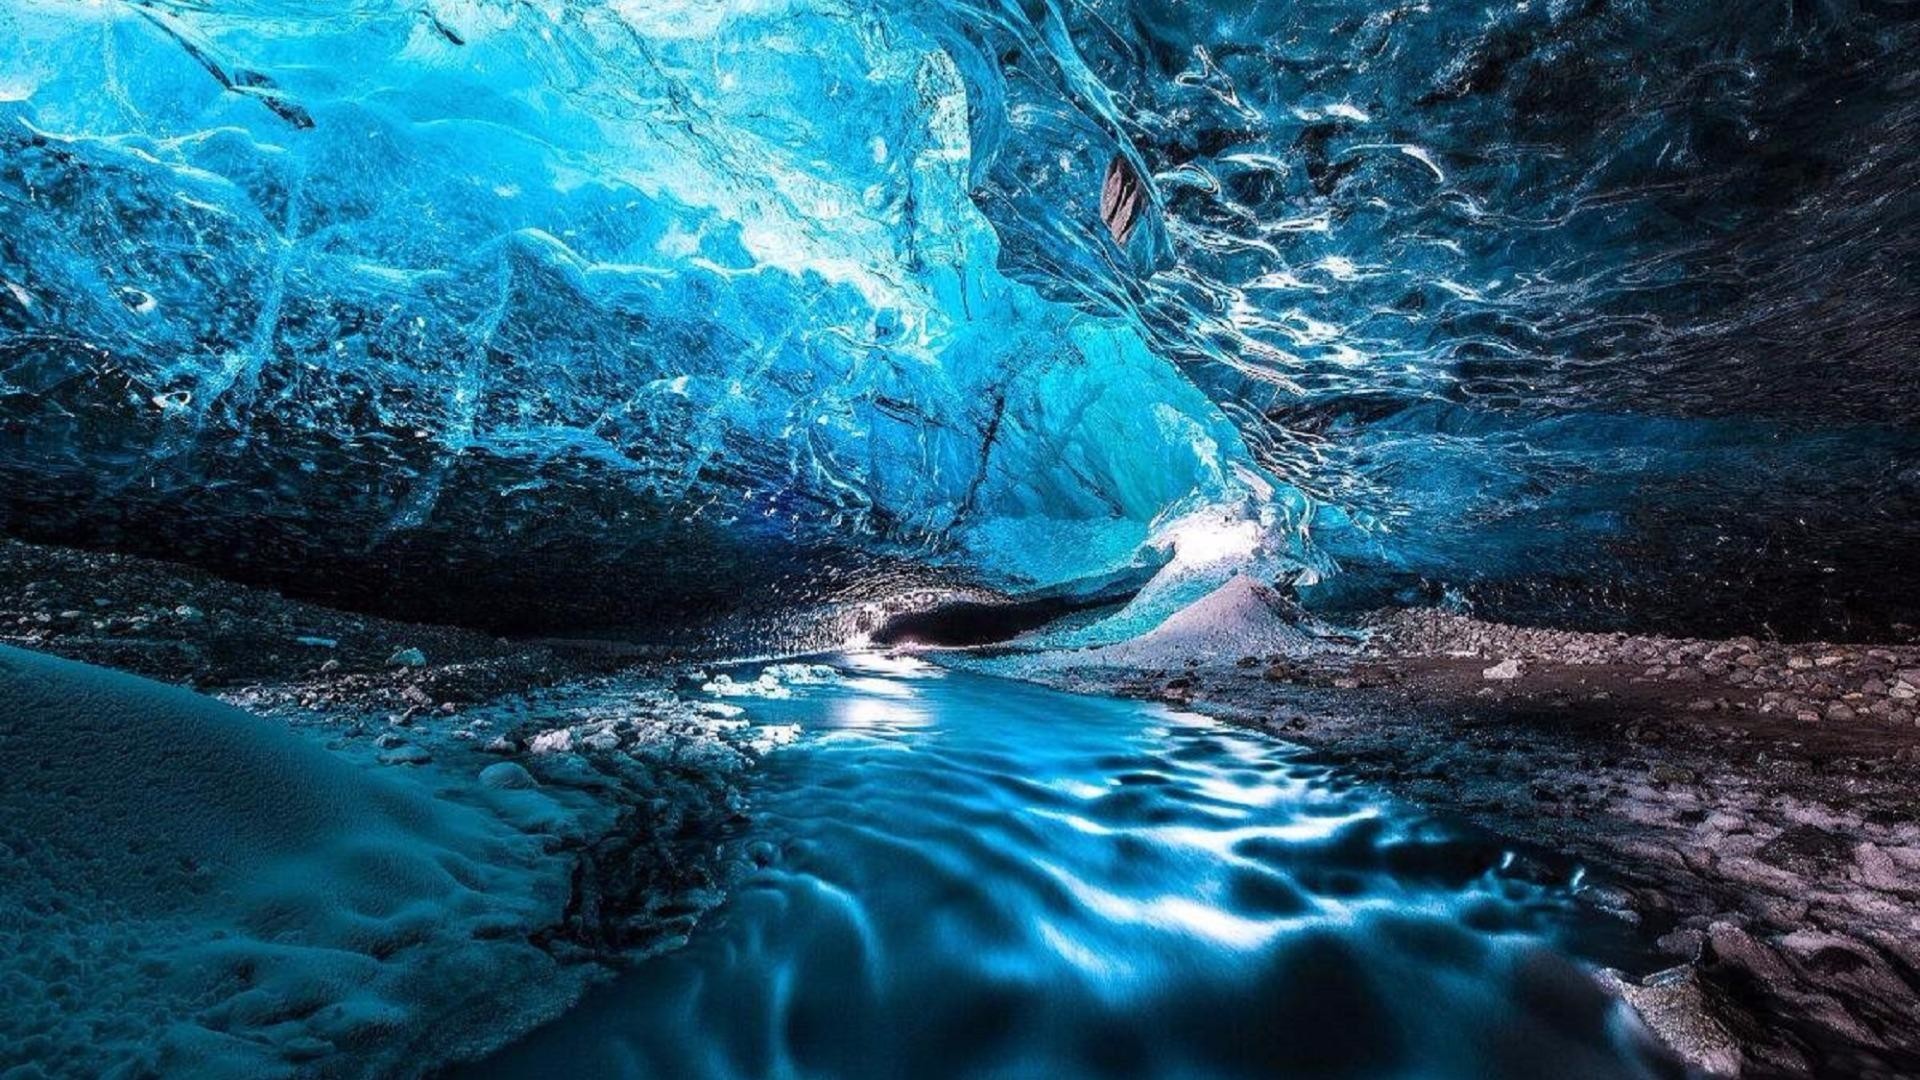 Ice Cave Wallpaper 71 Images